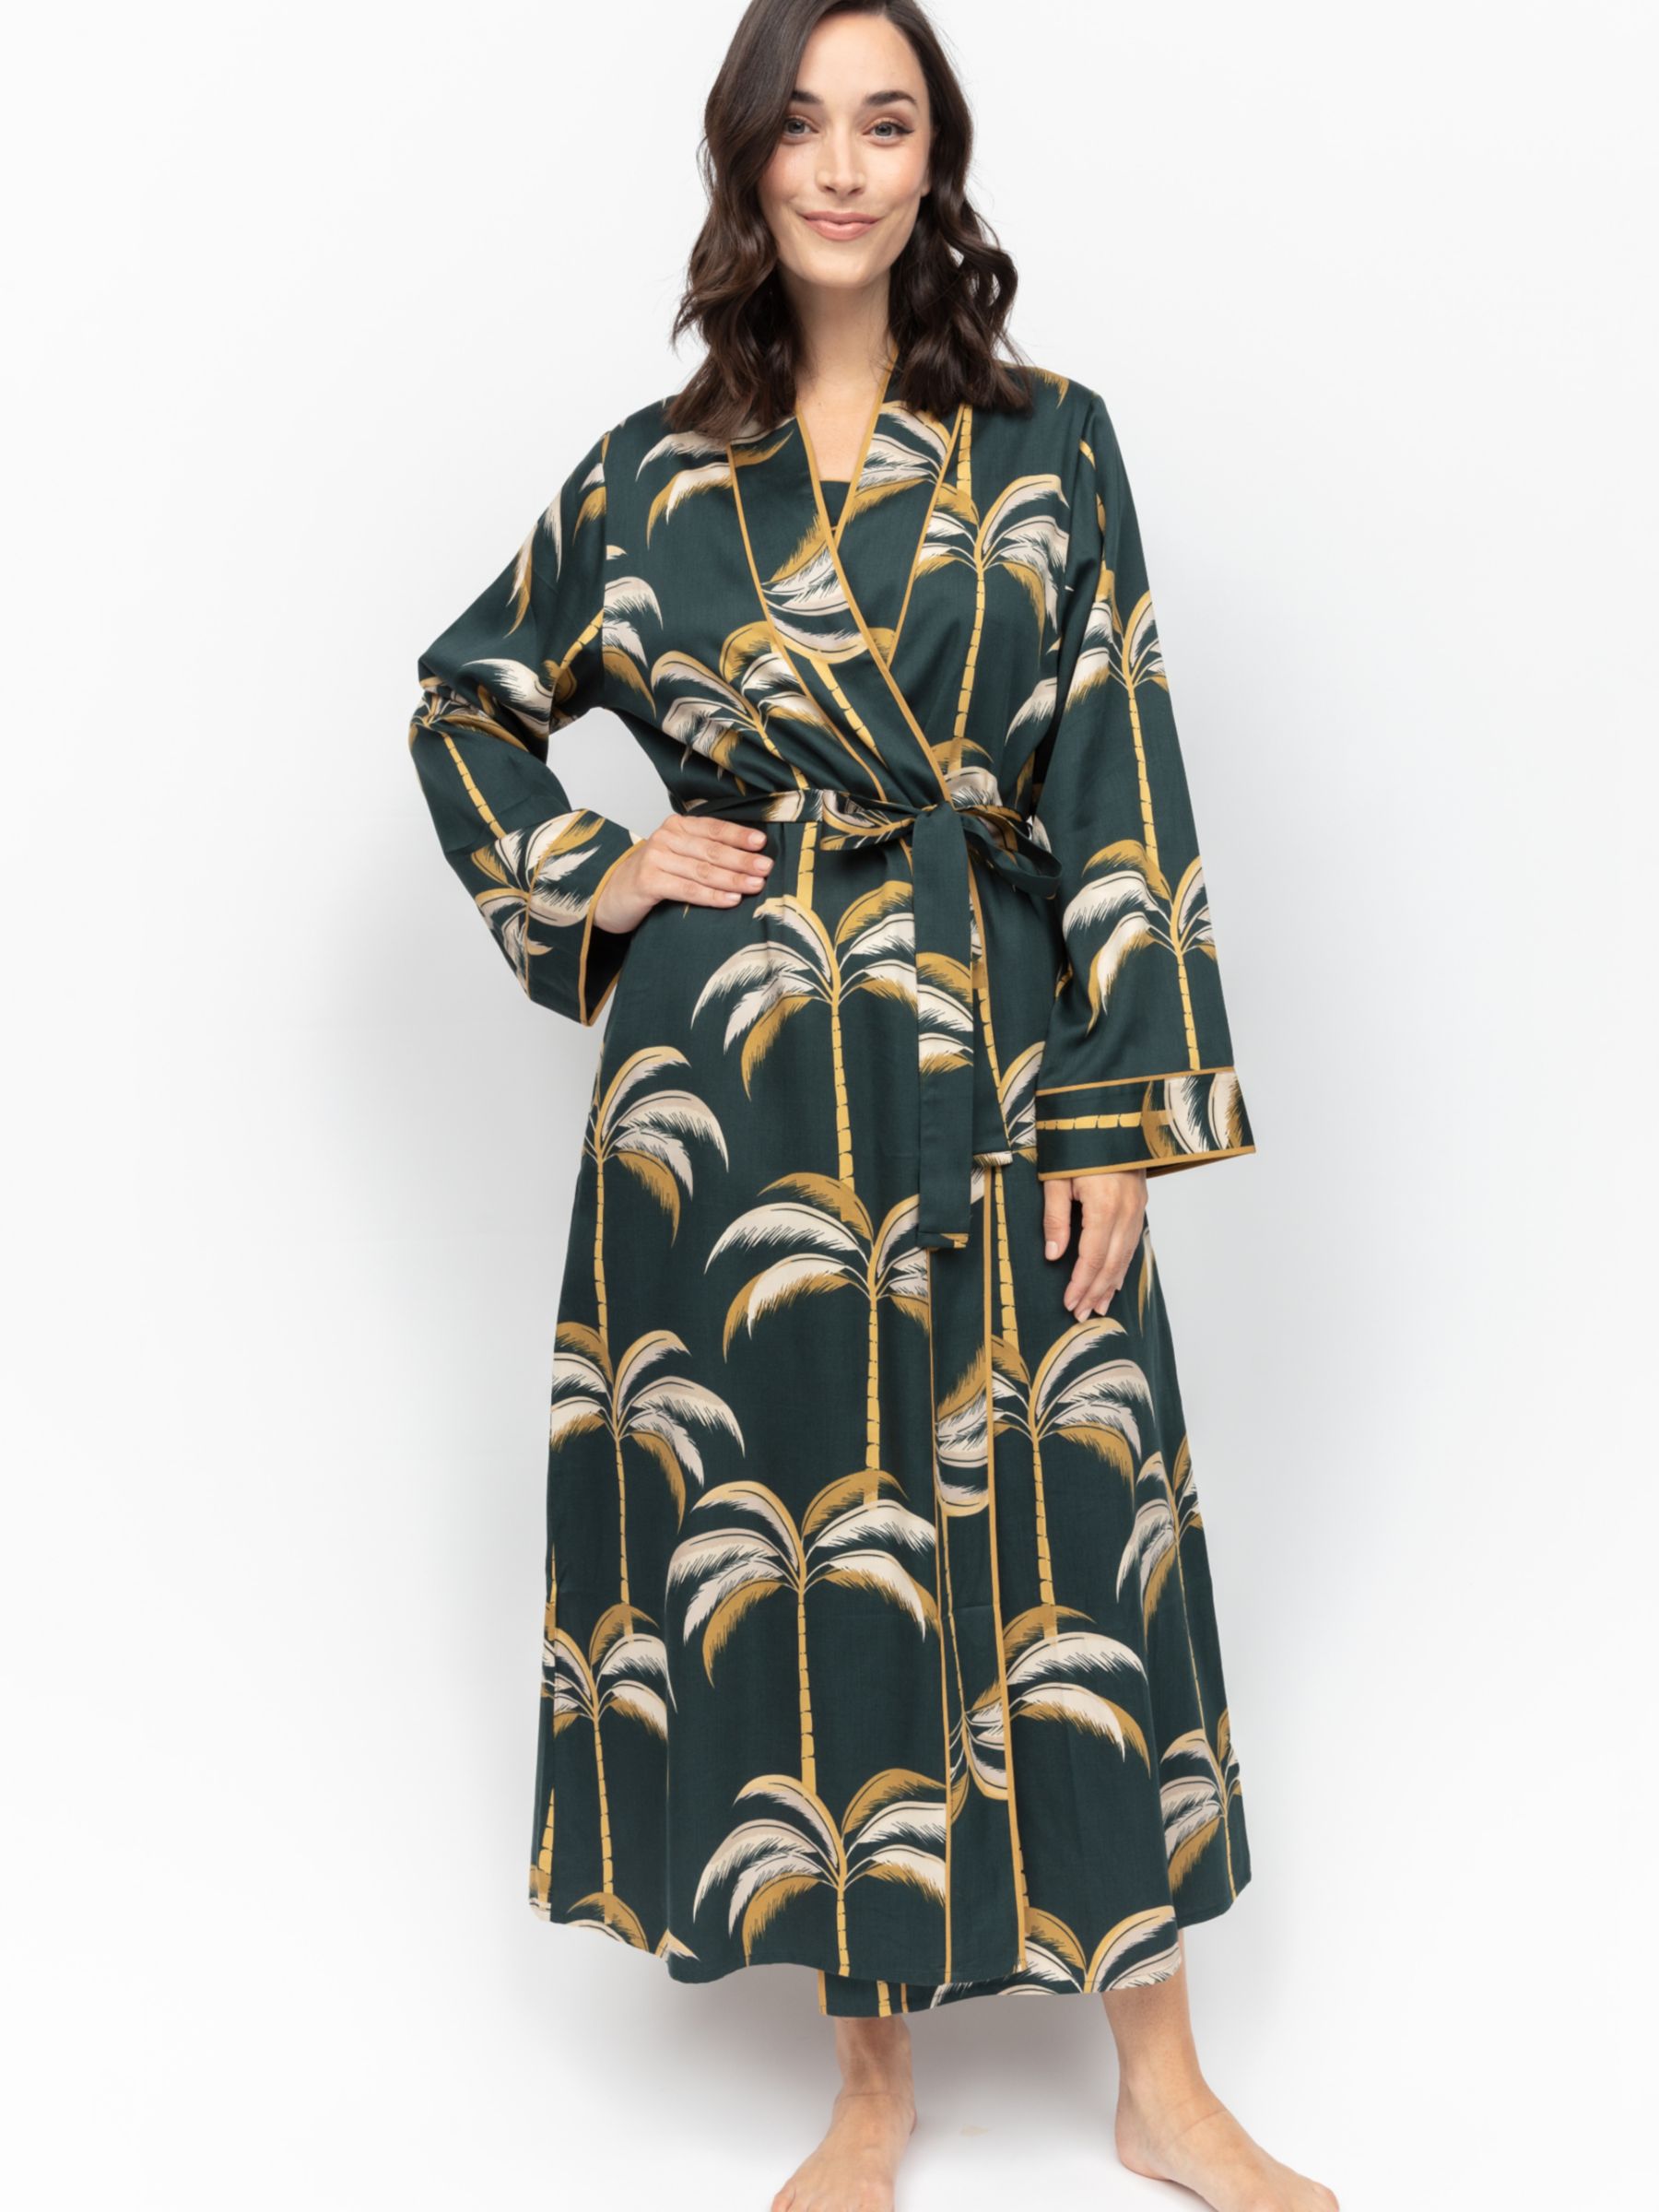 Fable & Eve Pimlico Palm Print Dressing Gown, Emerald Green, 8